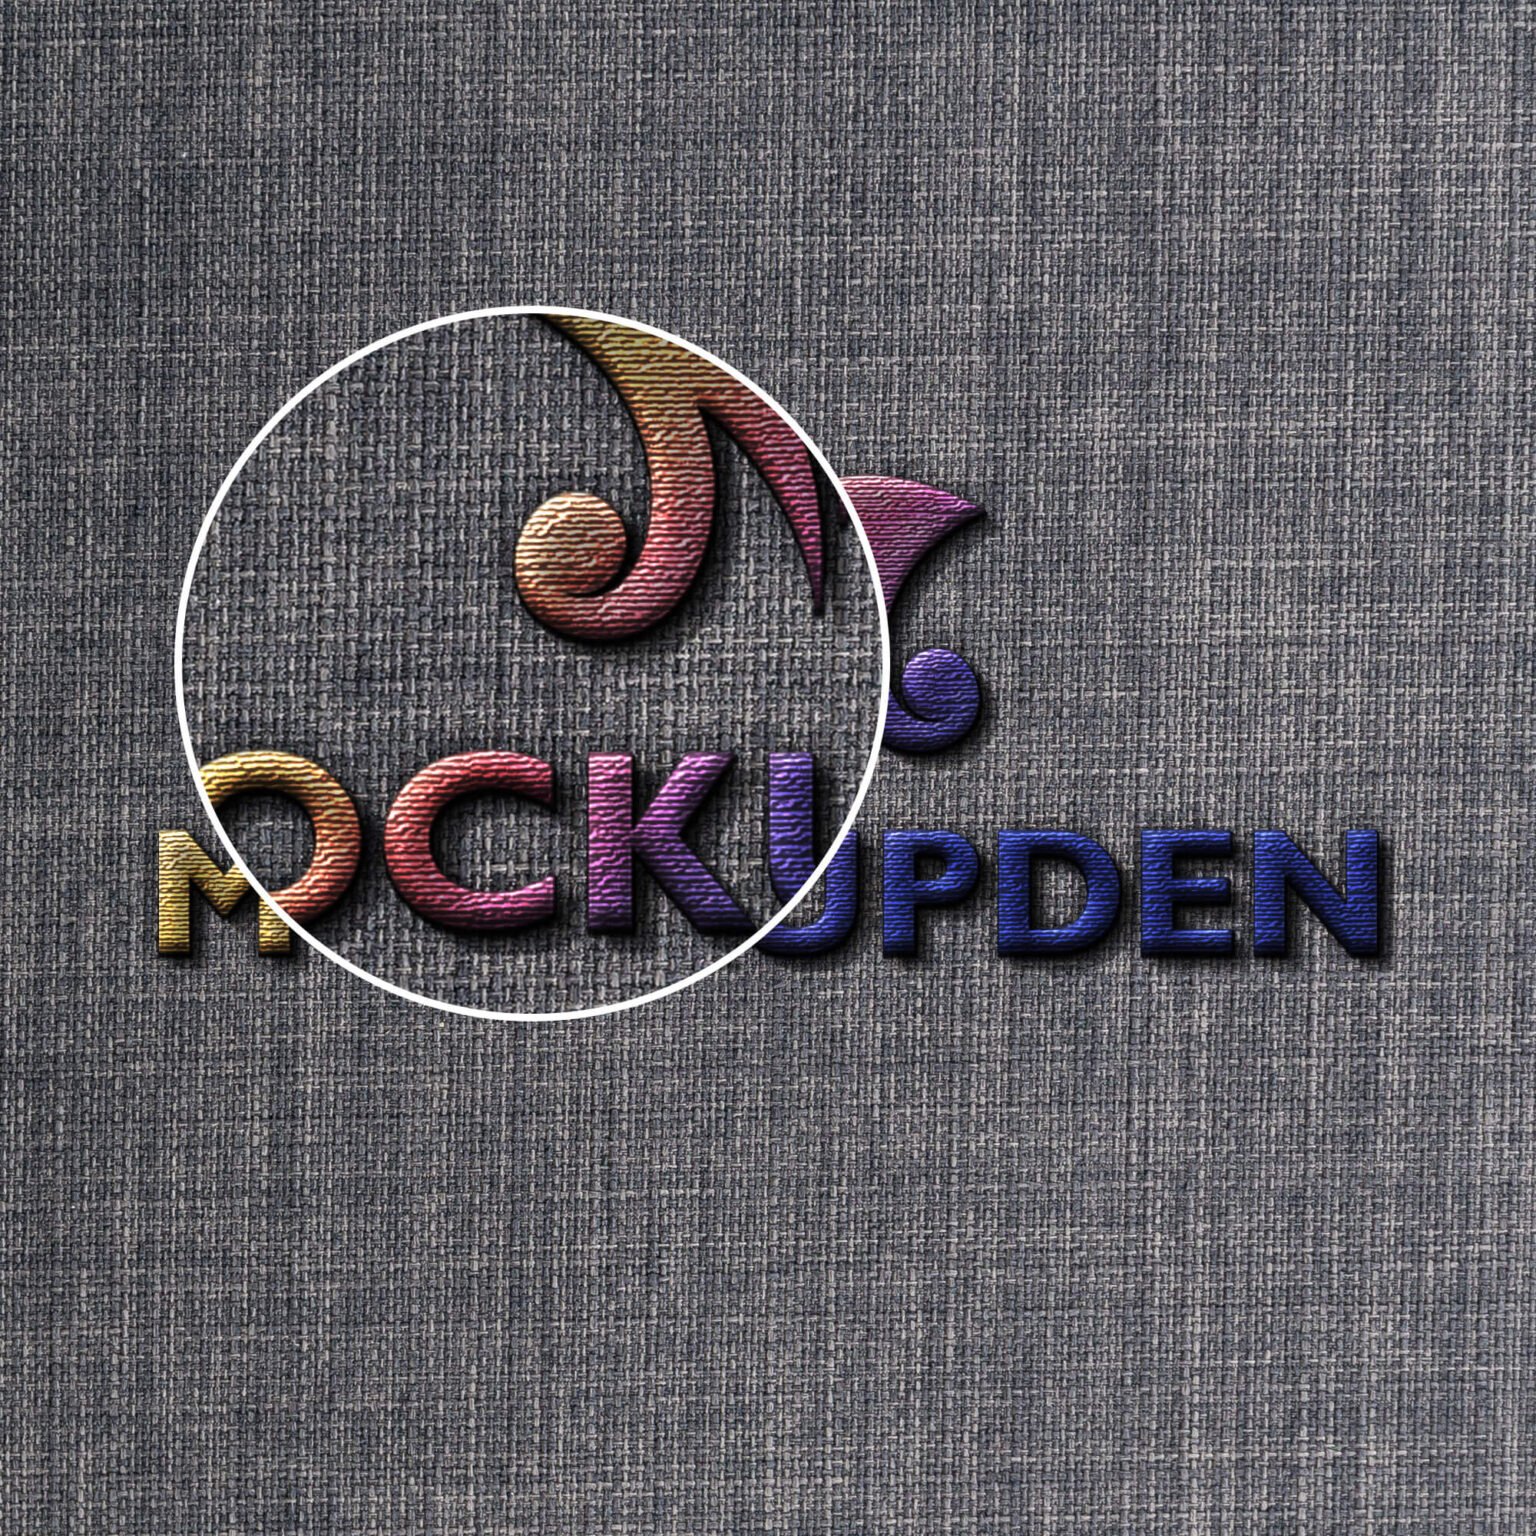 Download Free Embroidery Stitch Mockup PSD Template - Mockup Den